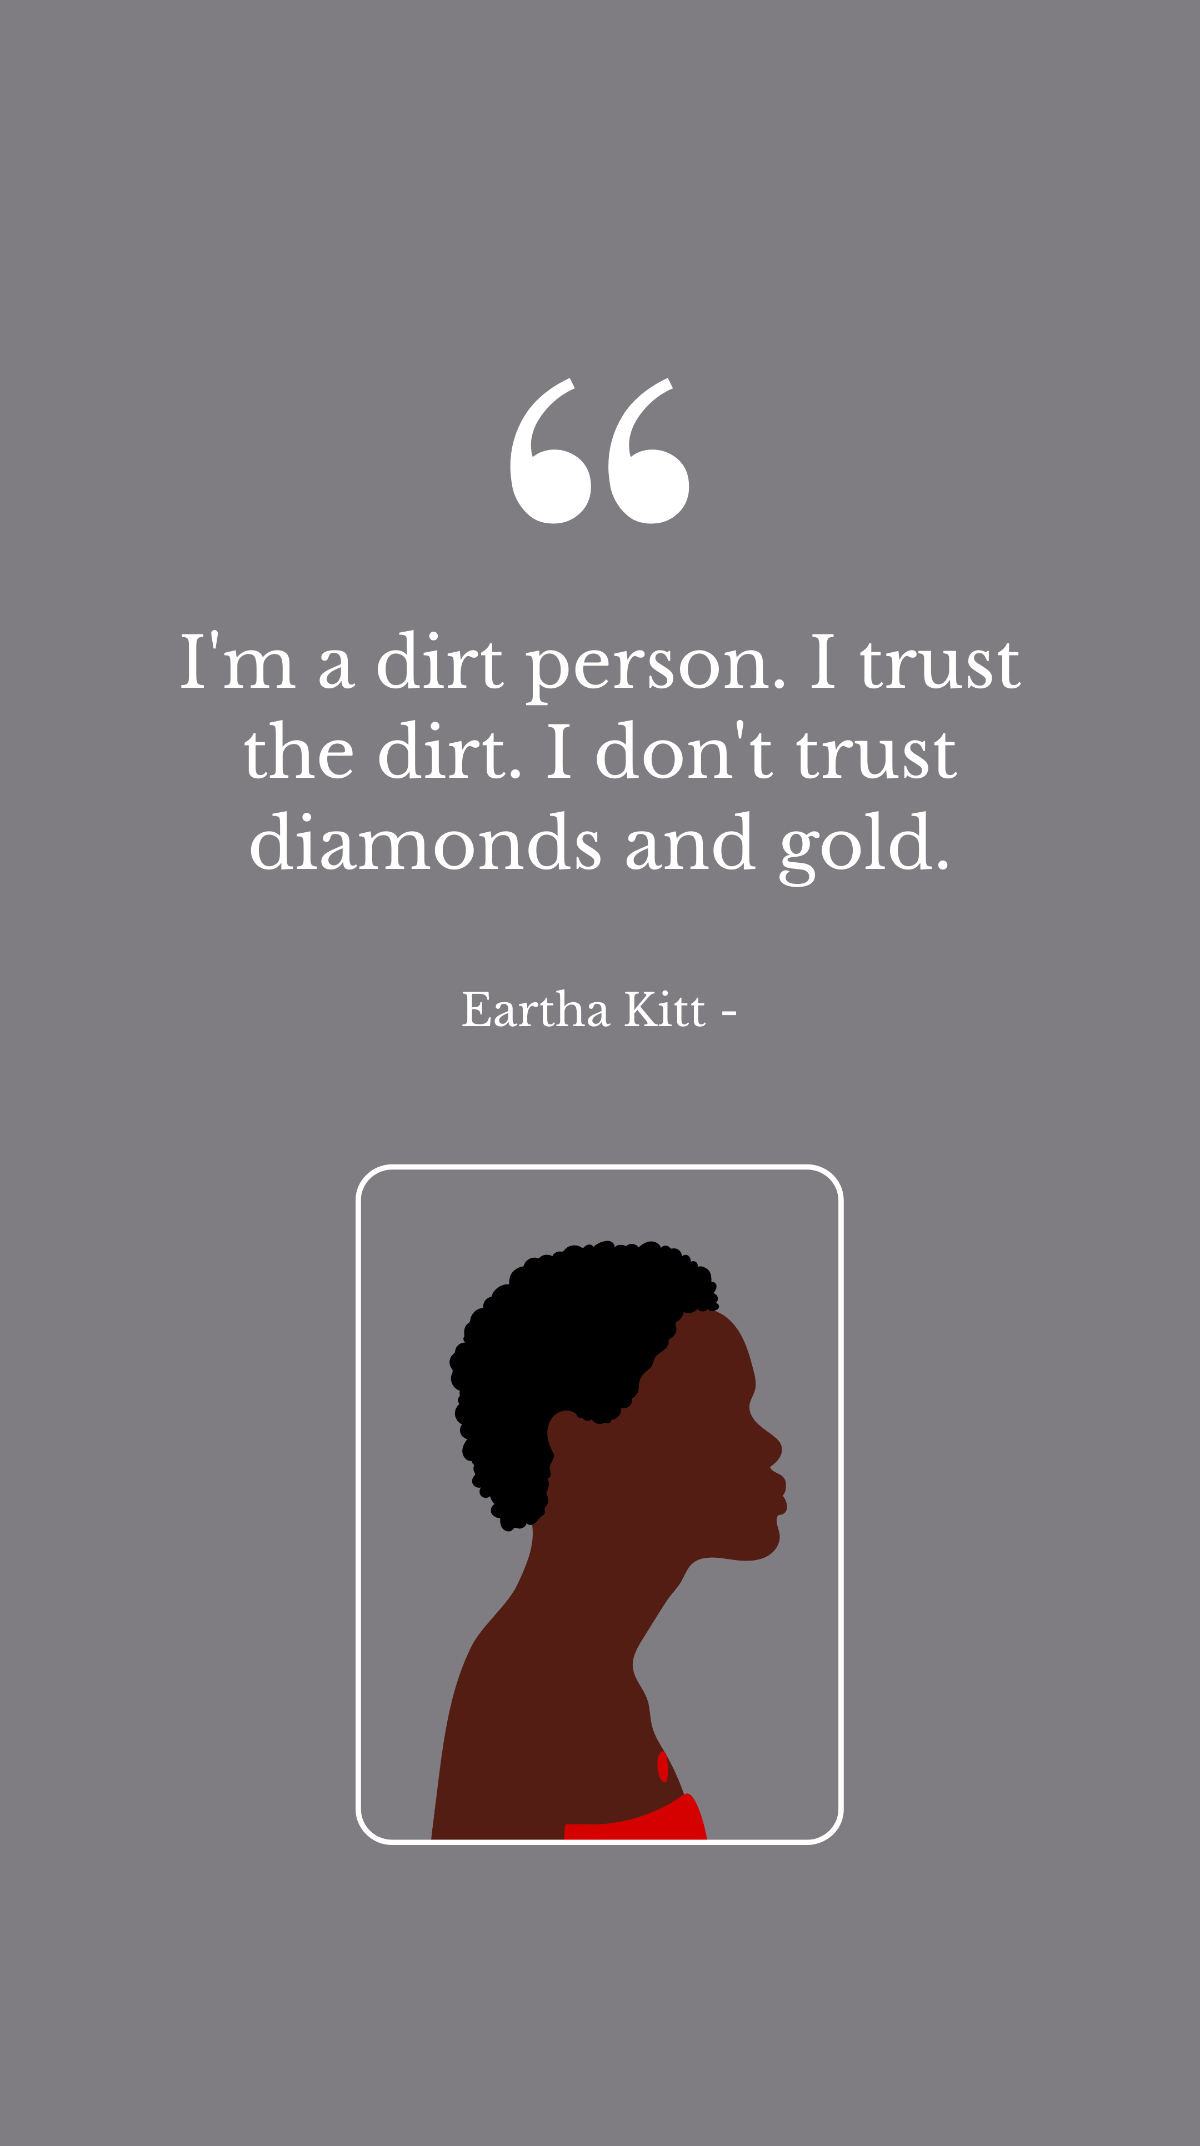 Free Eartha Kitt - I'm a dirt person. I trust the dirt. I don't trust diamonds and gold. Template